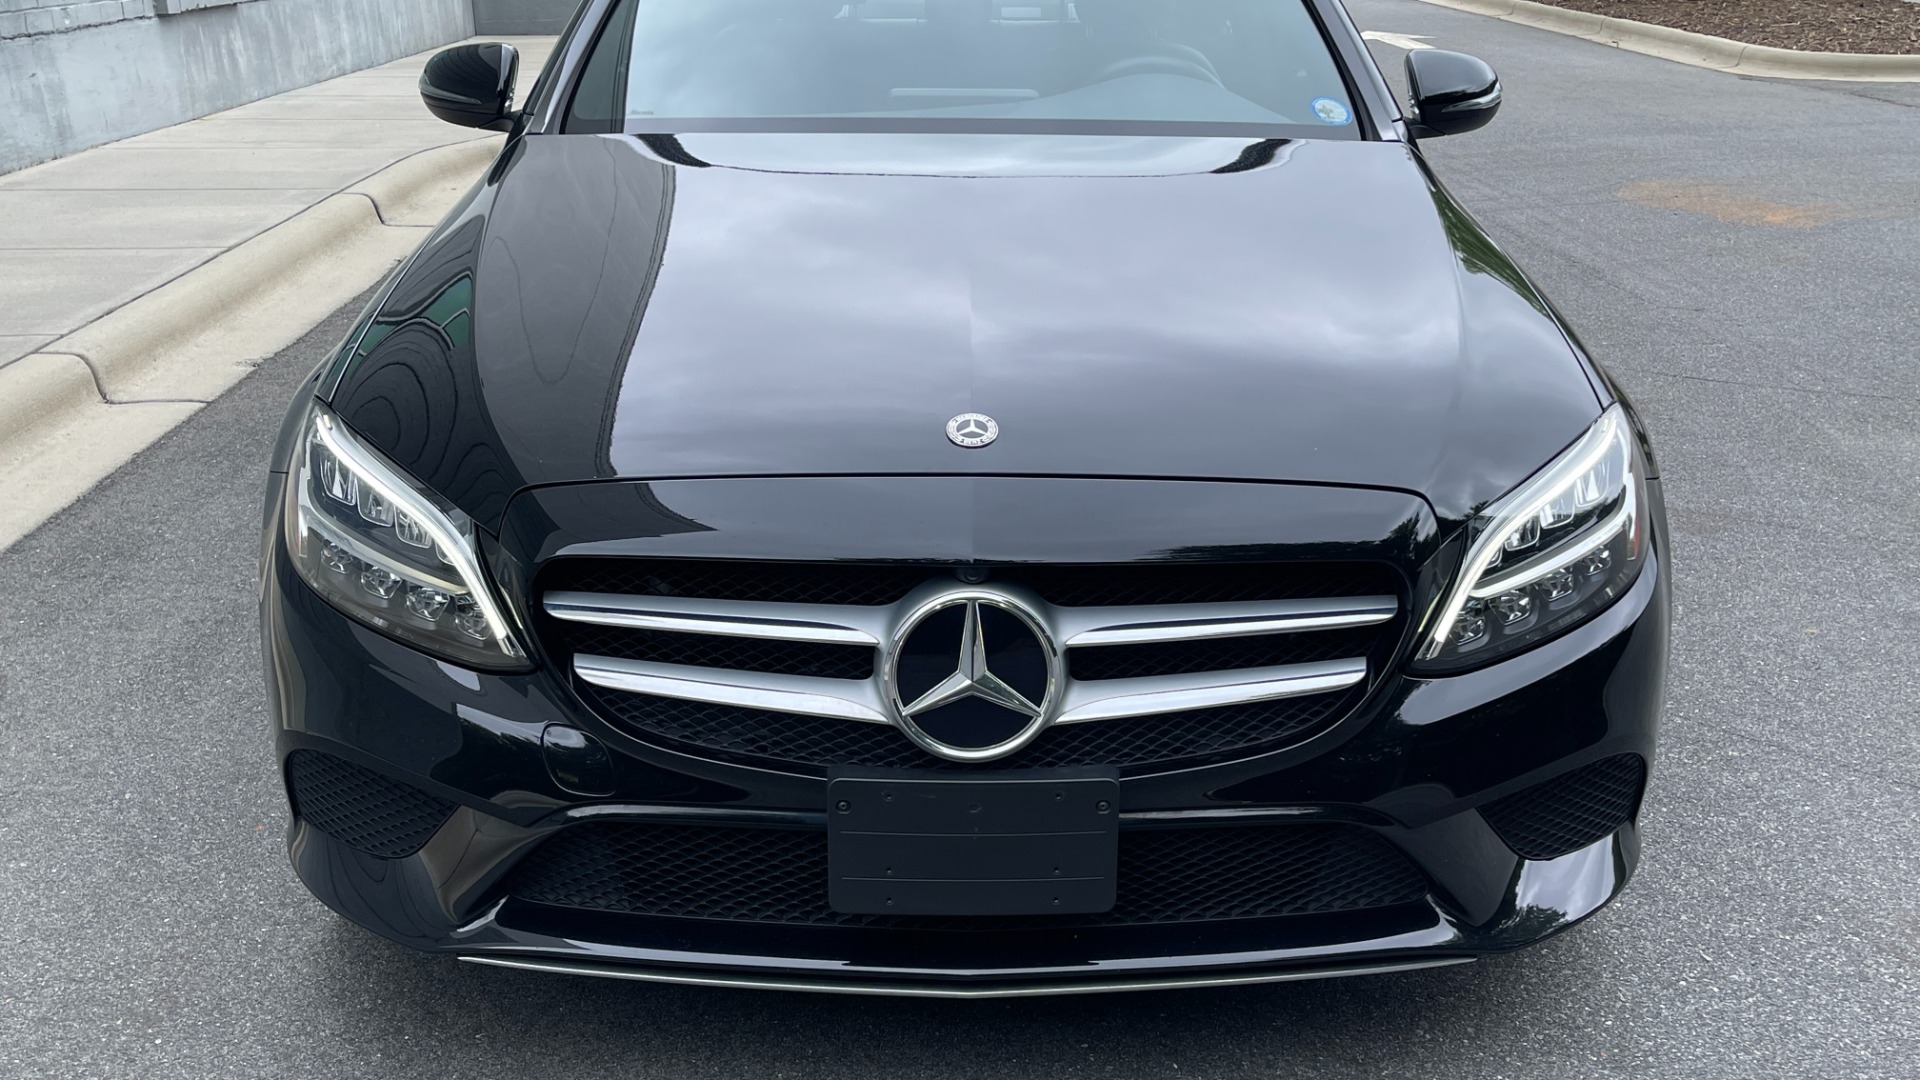 Used 2019 Mercedes-Benz C-Class C 300 / 4MATIC / BURMESTER SOUND / PANORAMIC ROOF / PREMIUM / MULTIMEDIA for sale $33,495 at Formula Imports in Charlotte NC 28227 3